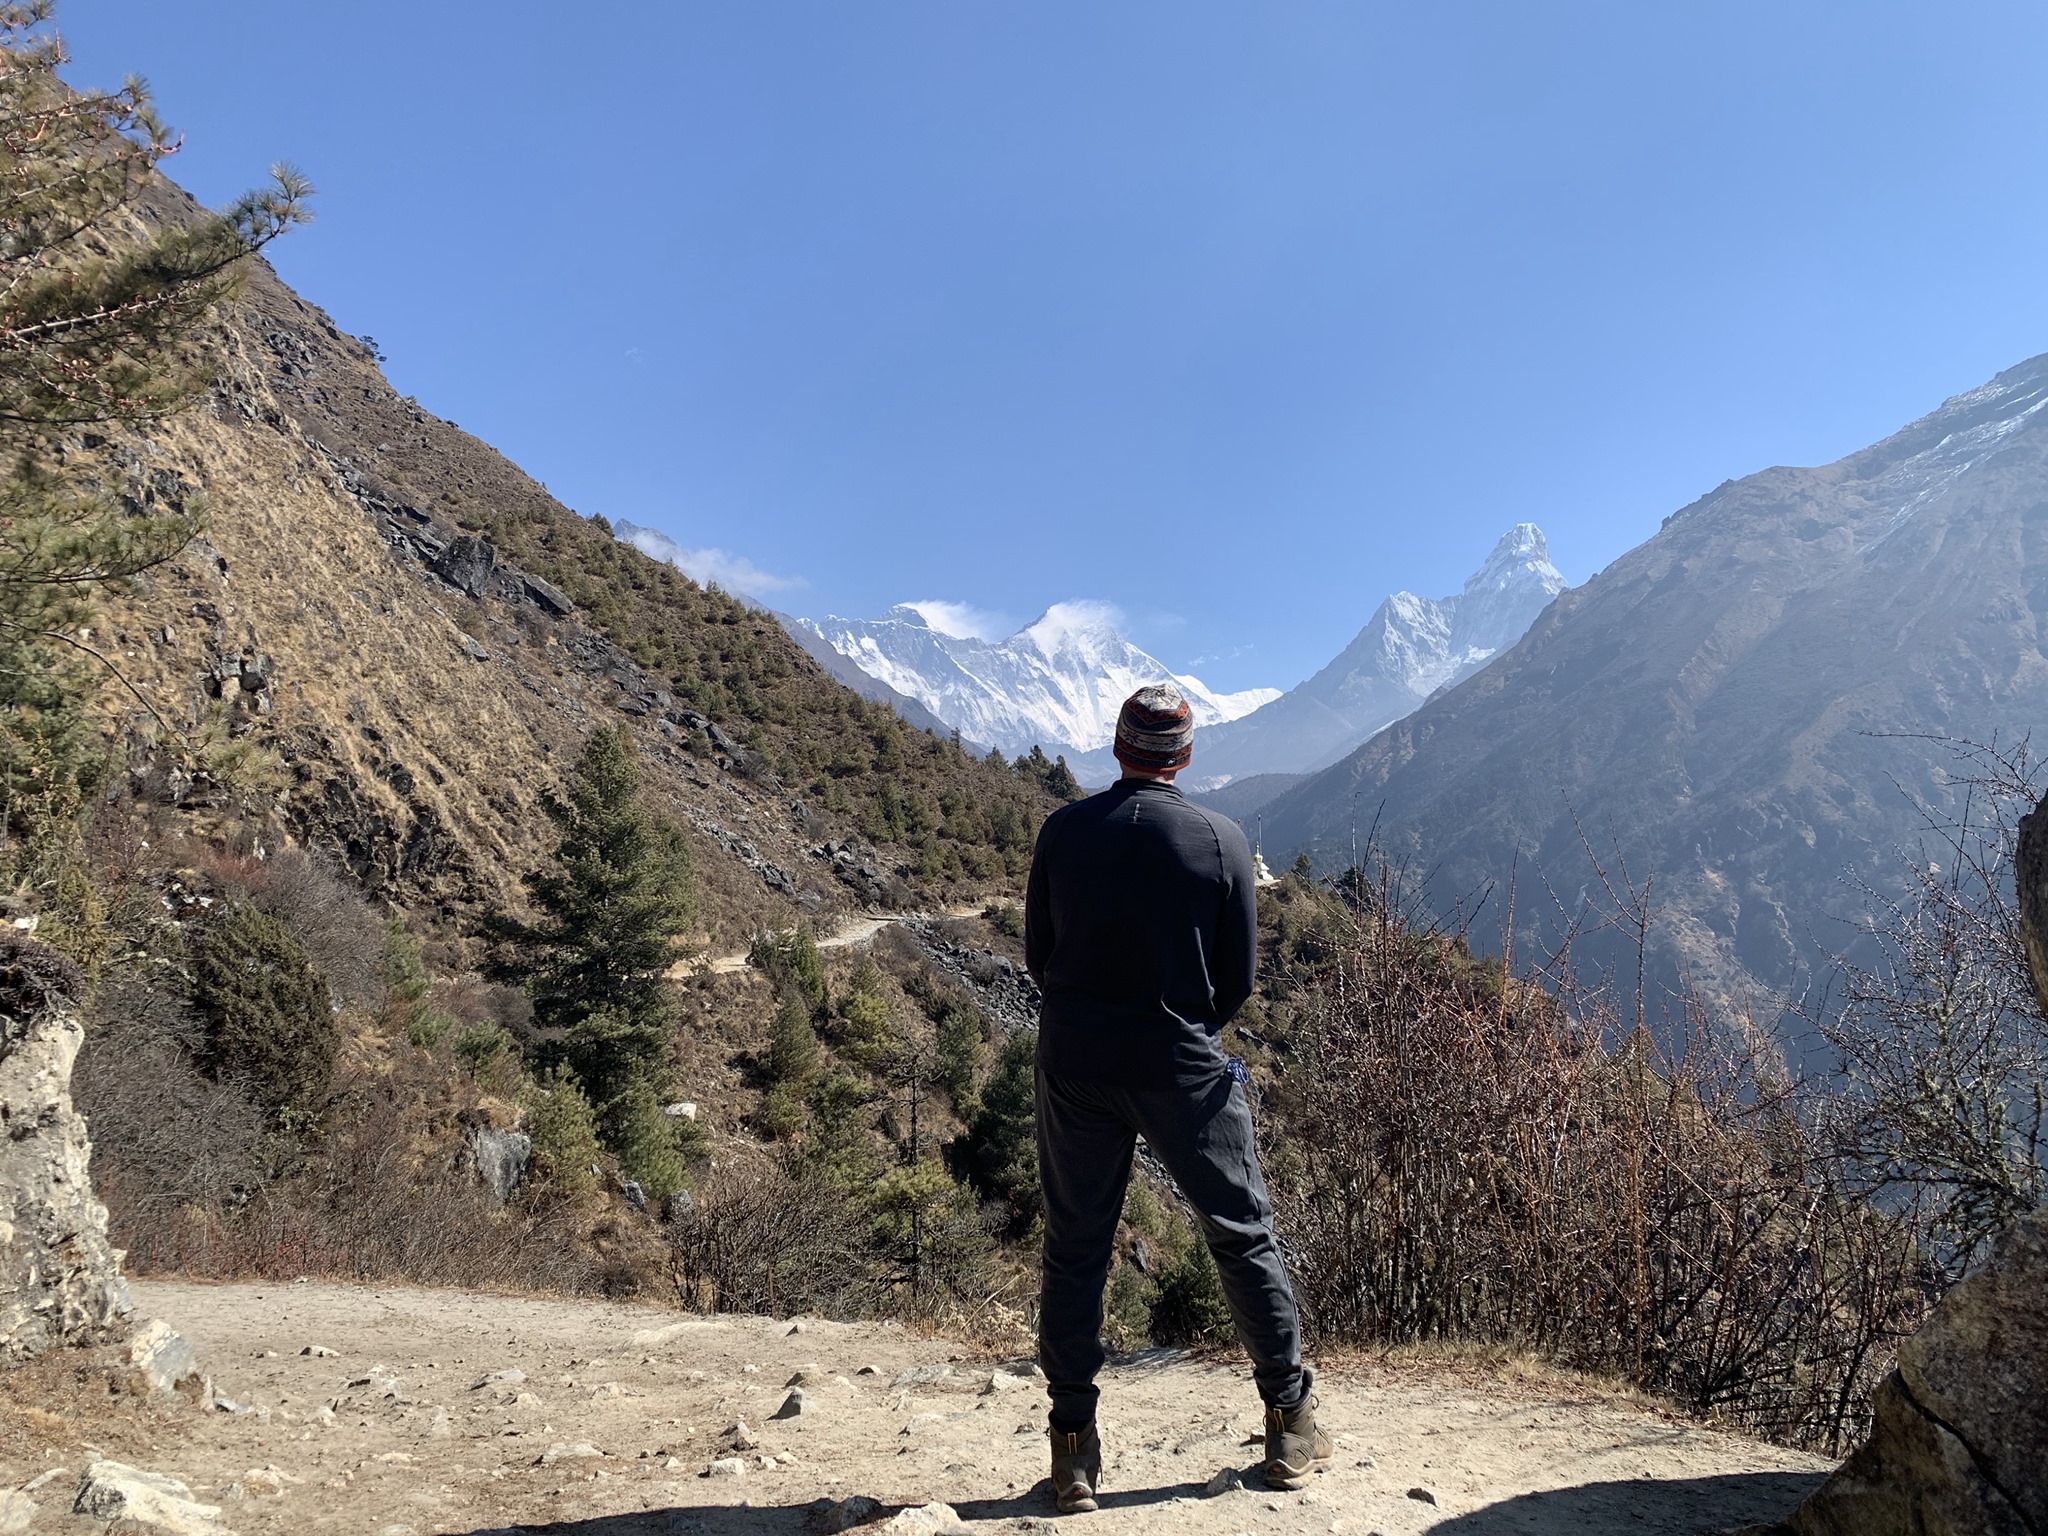 Andy Shallal (’17) on his Journey to Mount Everest